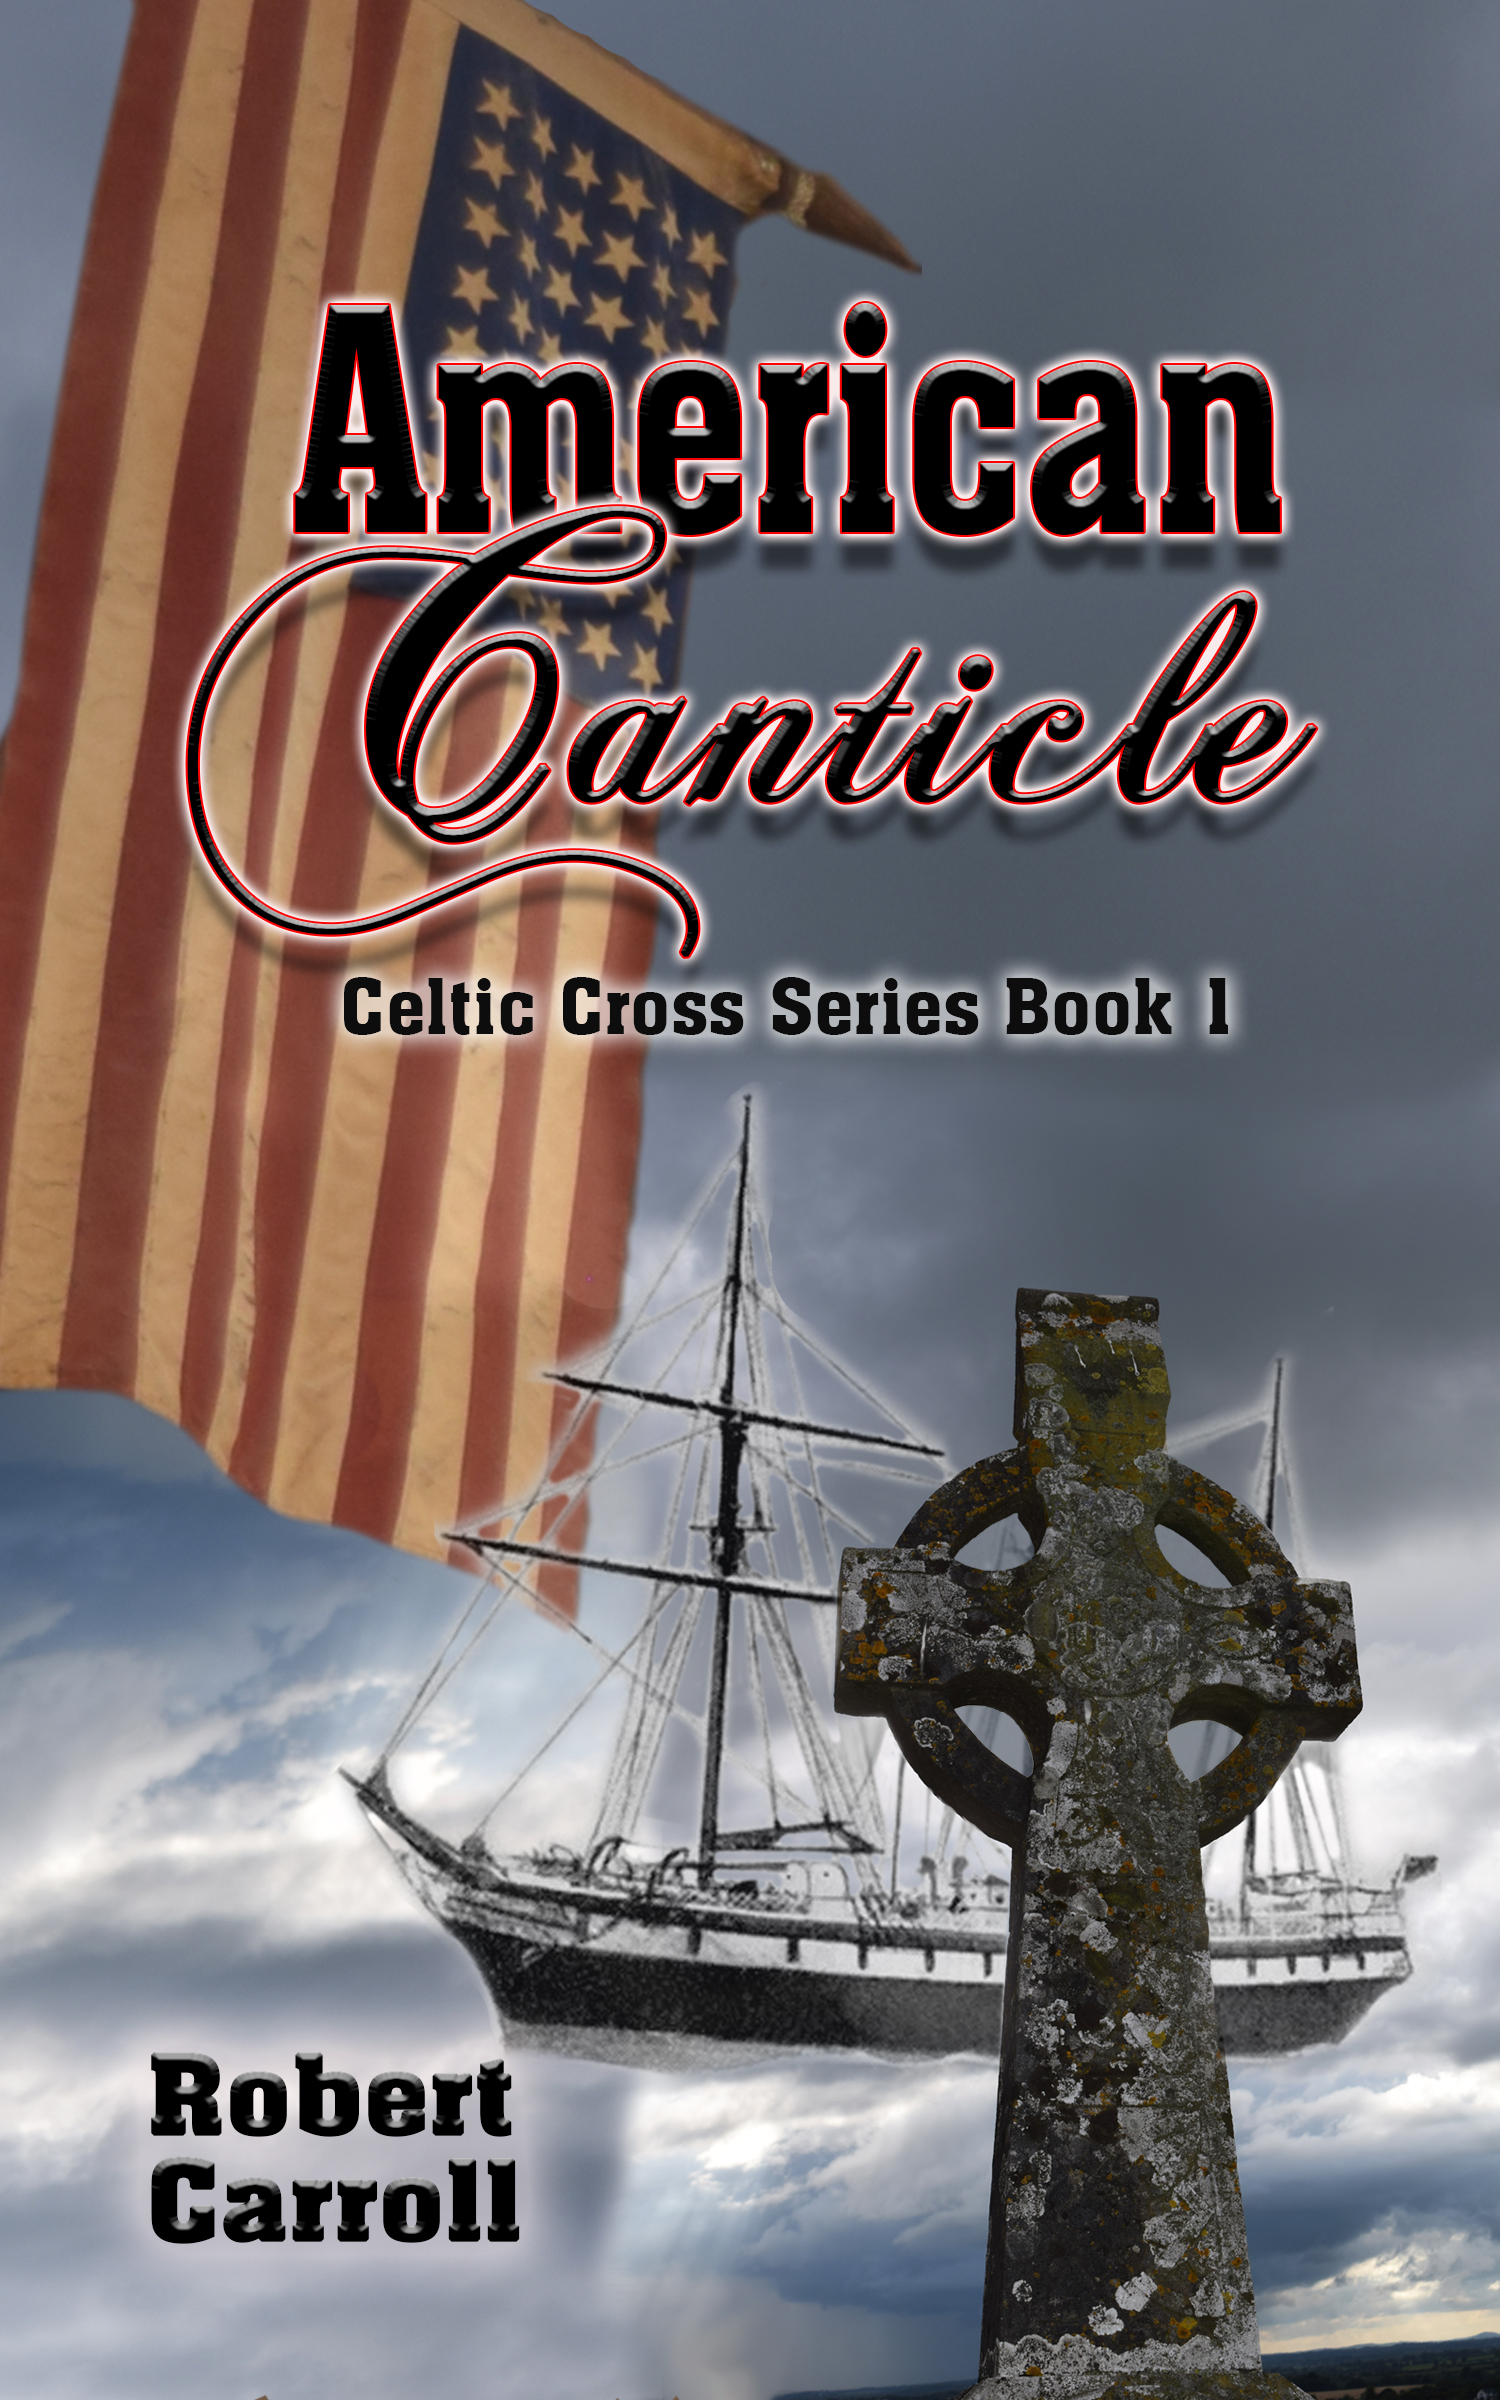 American%20Canticle%20Cover